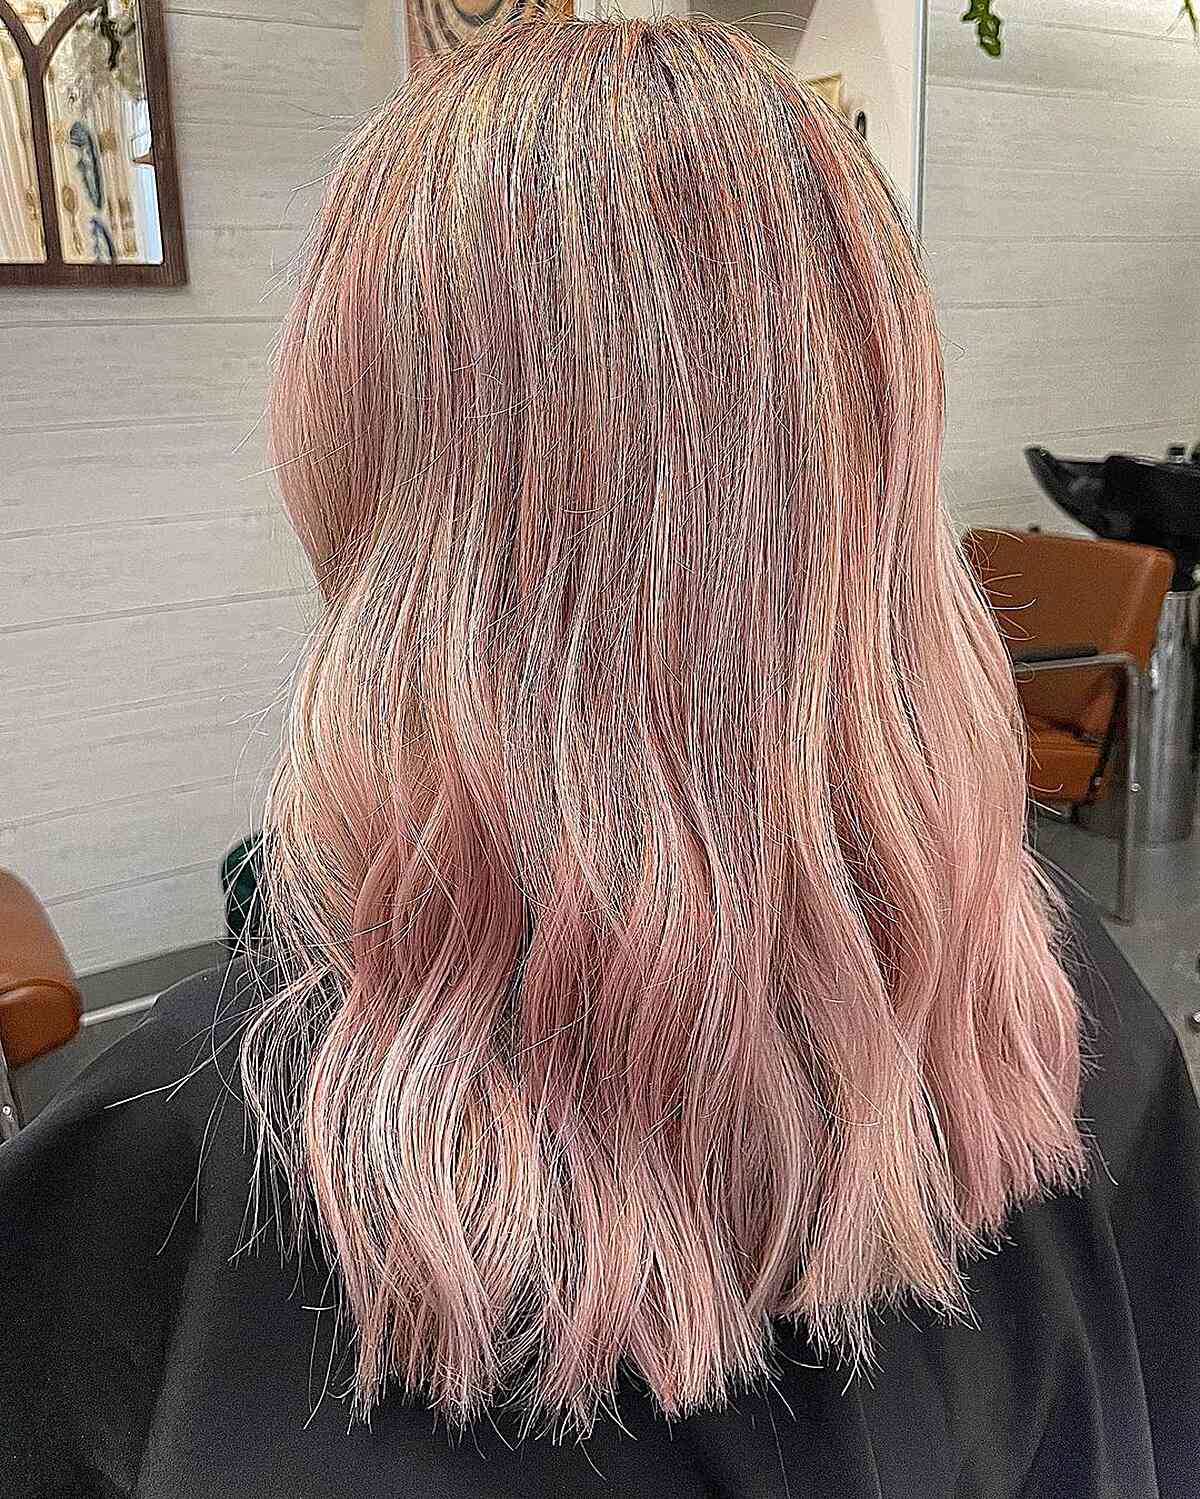 Lived-In Rose Gold hair color on medium-length hair